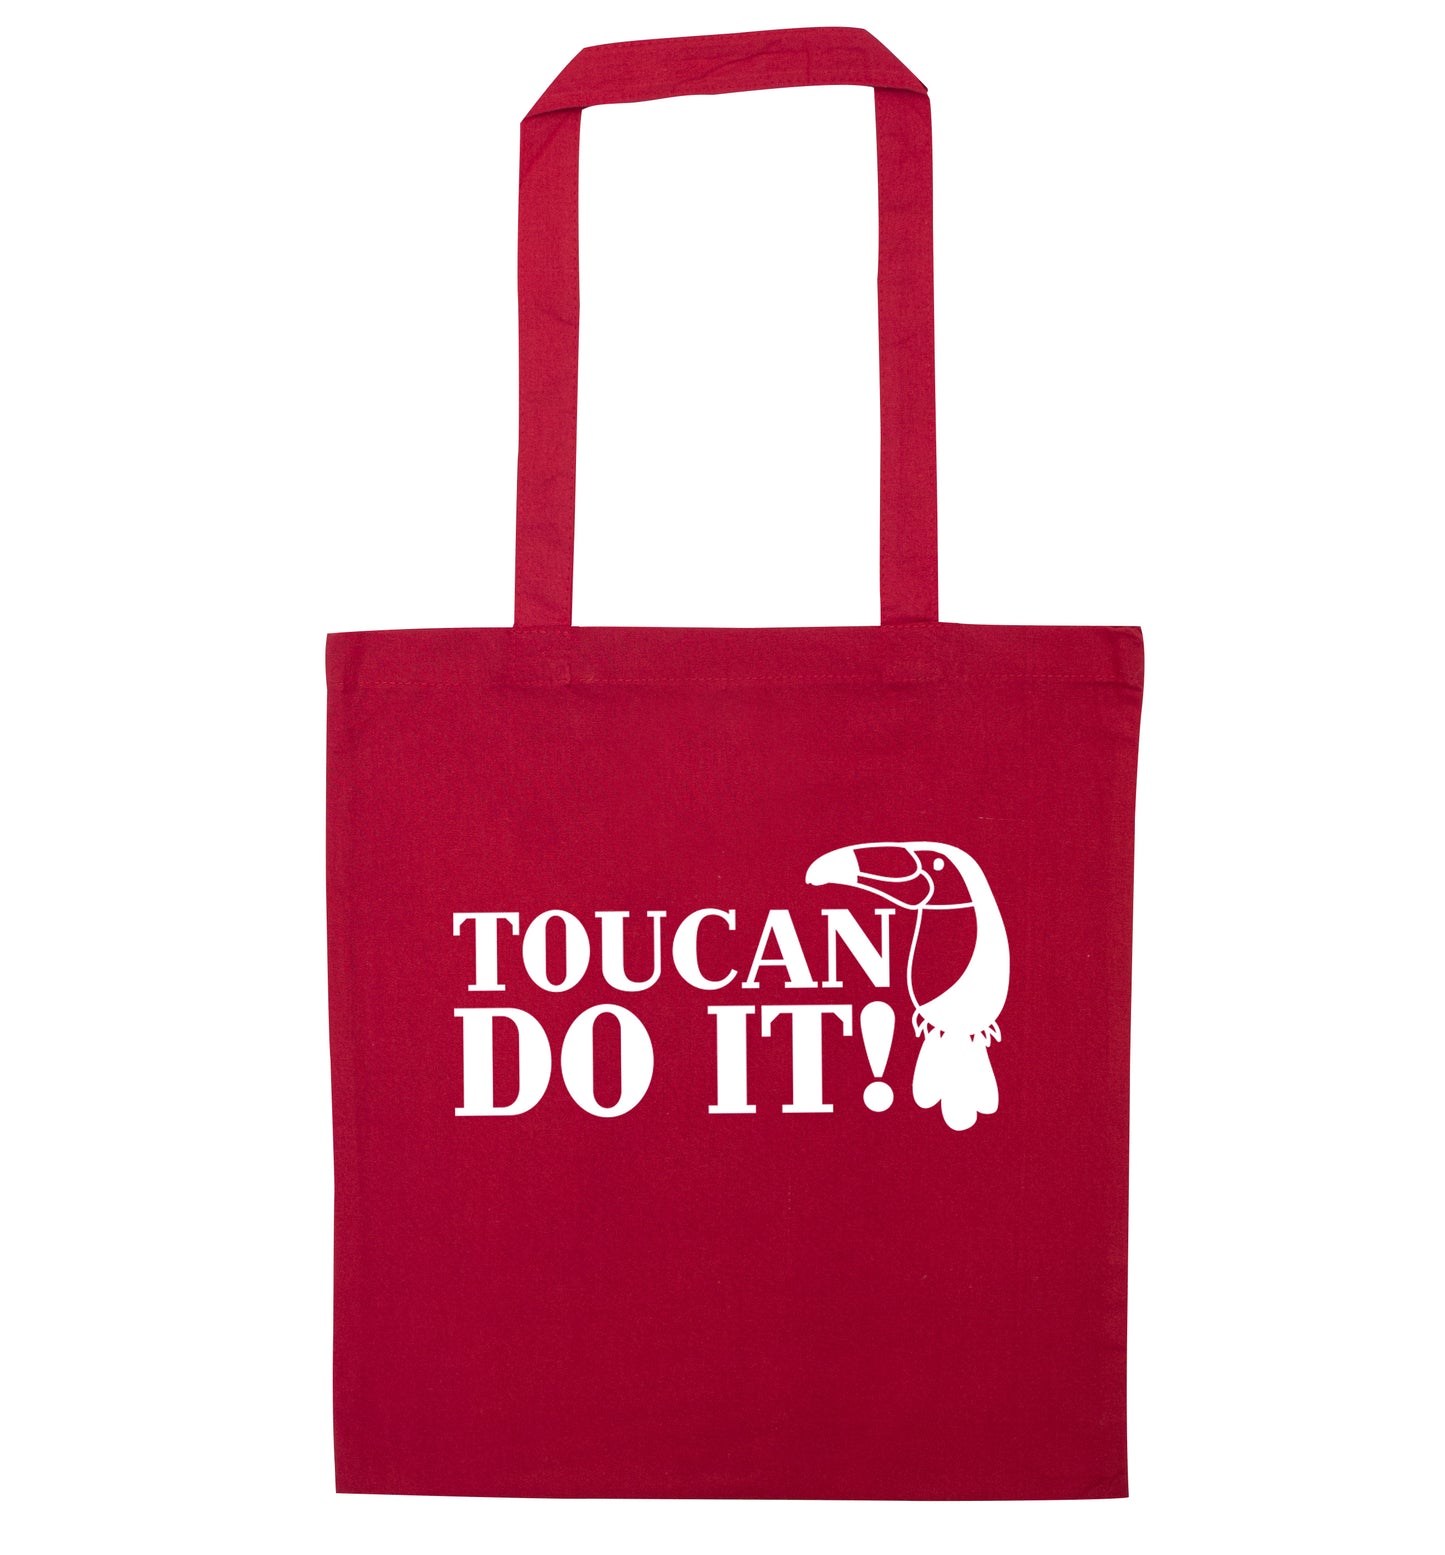 Toucan do it! red tote bag